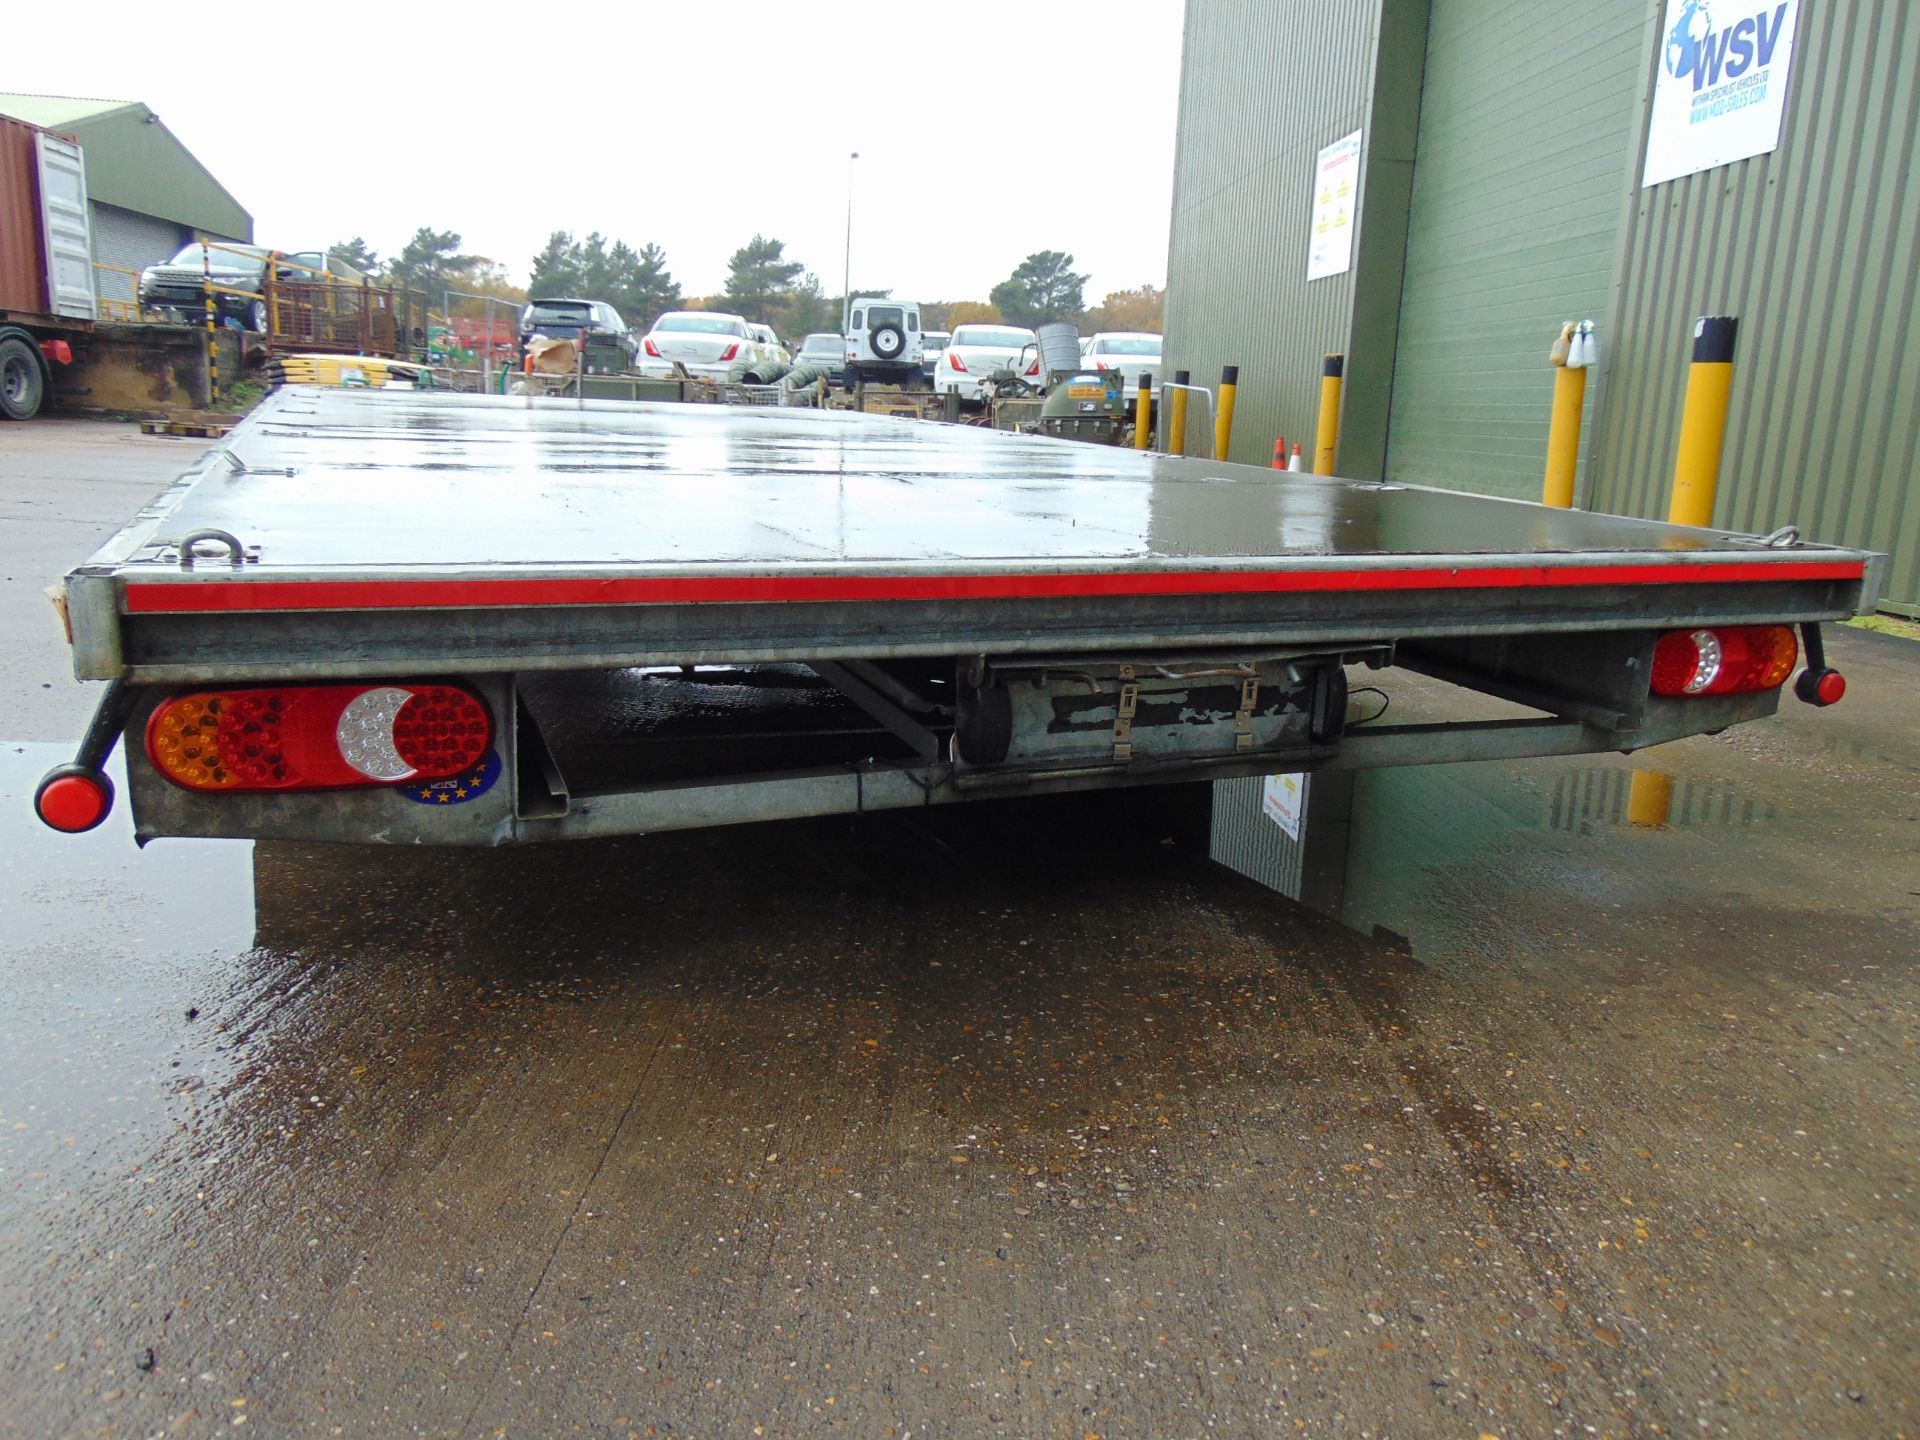 Bateson Twin Axle Flatbed 3.5 Tonne Transporter Trailer with Ramps bed dimensions L 5.8m x W 2.5m - Image 6 of 14